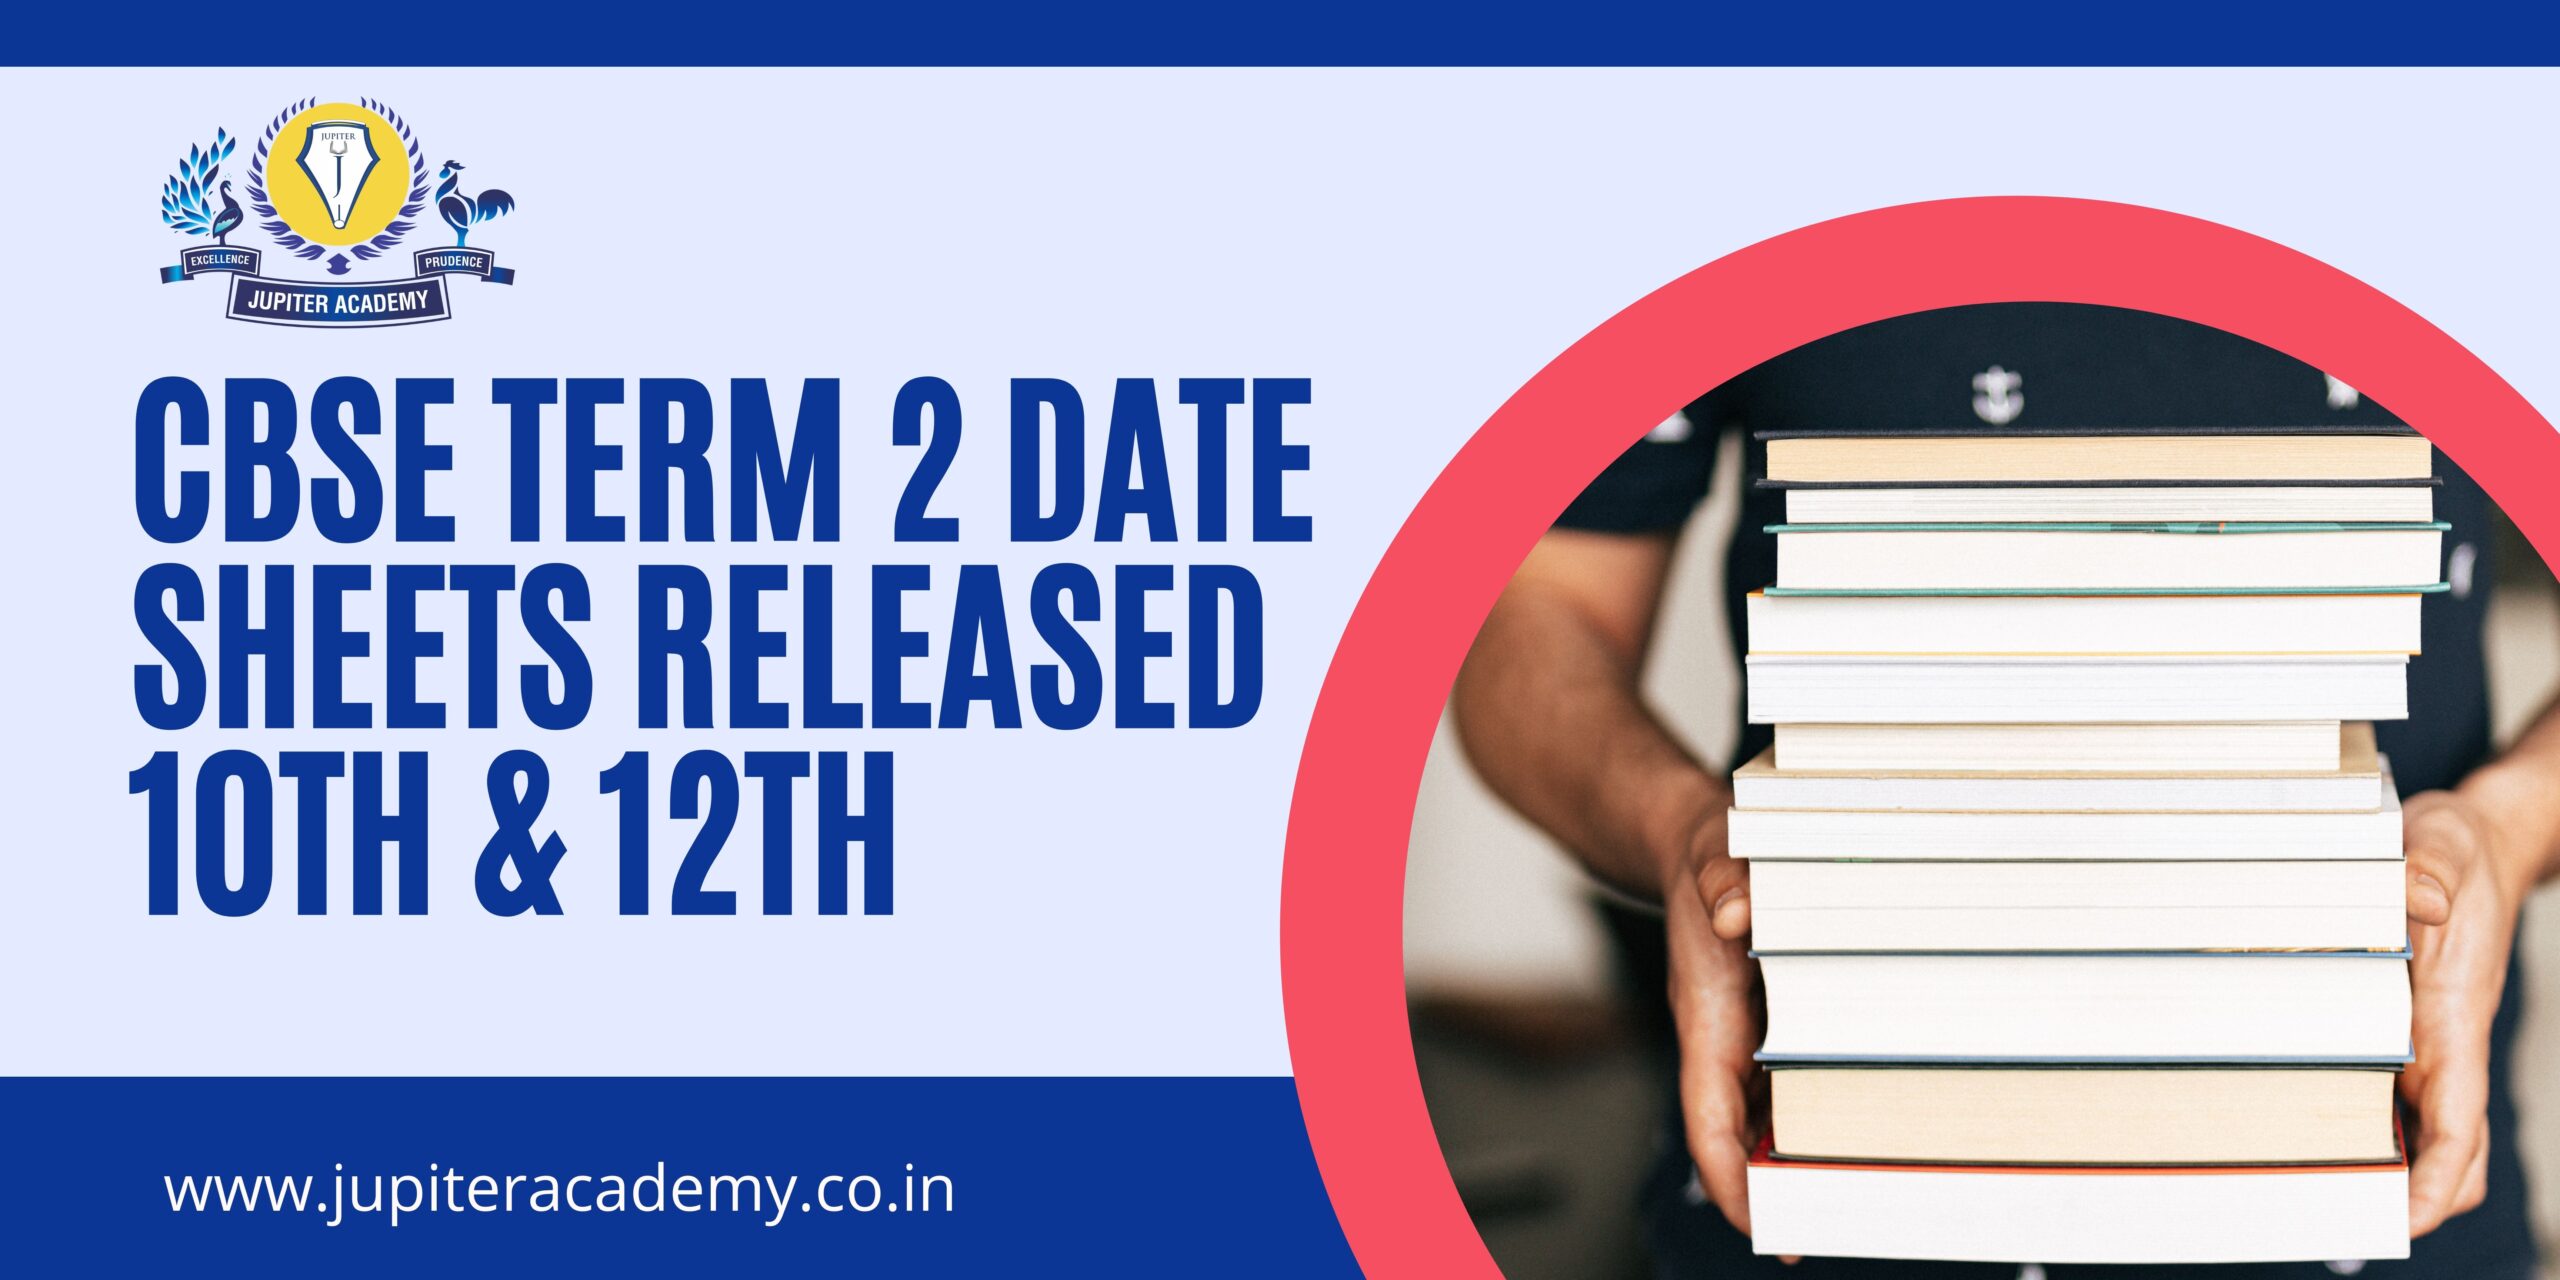 You are currently viewing CBSE Term 2 Date Sheets Released 10th & 12th